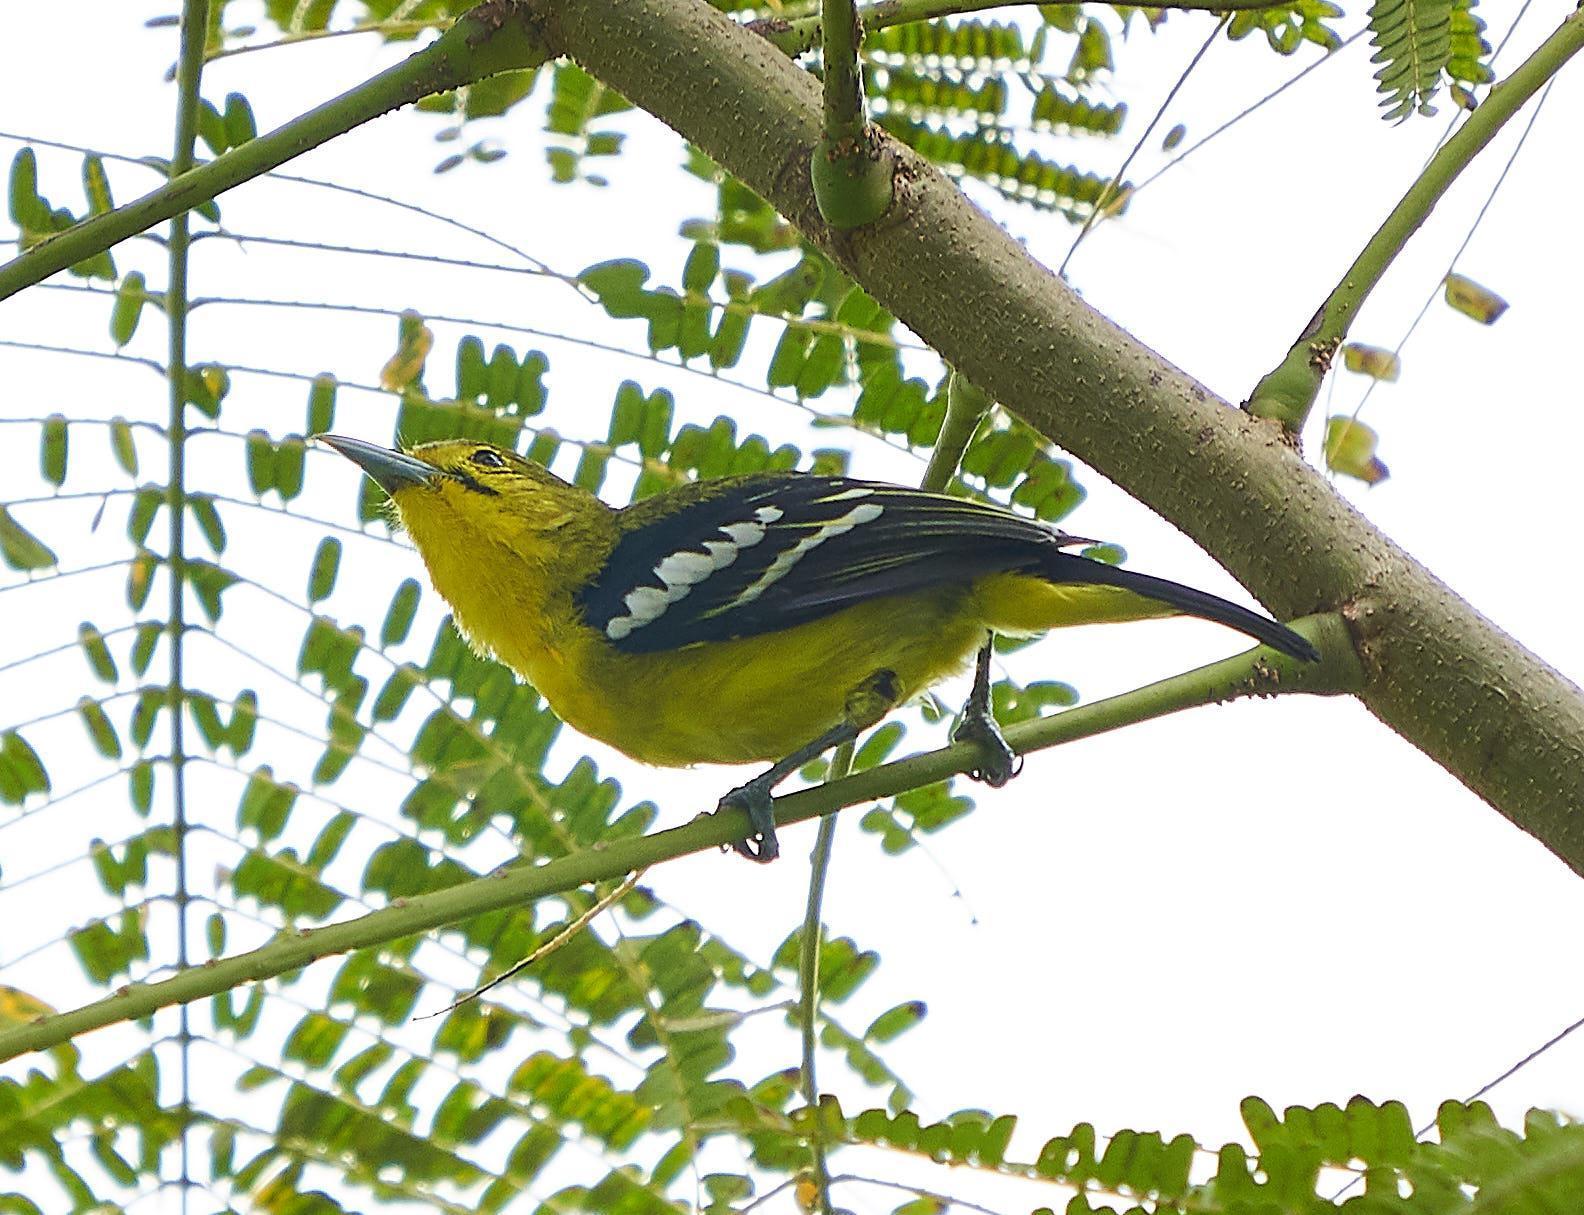 Common Iora Photo by Steven Cheong